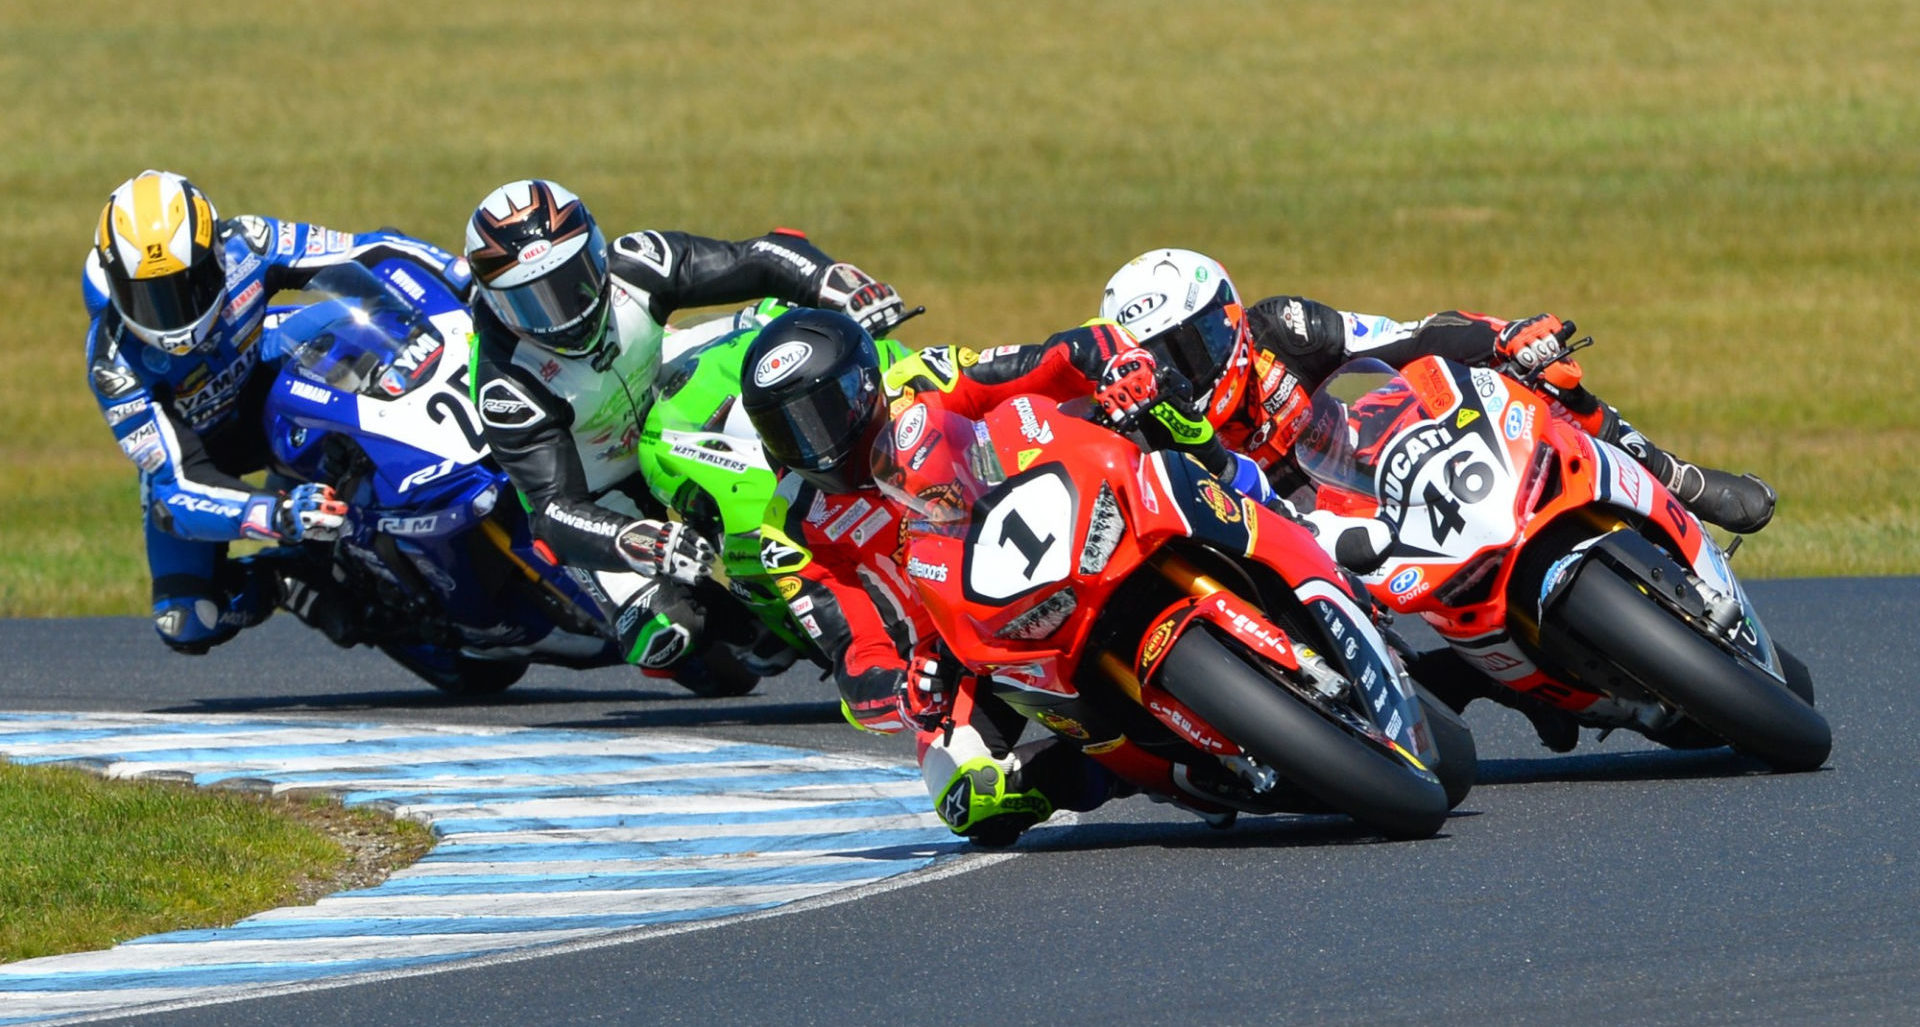 Troy Herfoss (1) leads Mike Jones (46), Matt Walters, and Daniel Falzon (25) during an Australian Superbike race at Phillip Island in 2019. Photo by Russell Colvin, courtesy Penrite Honda.